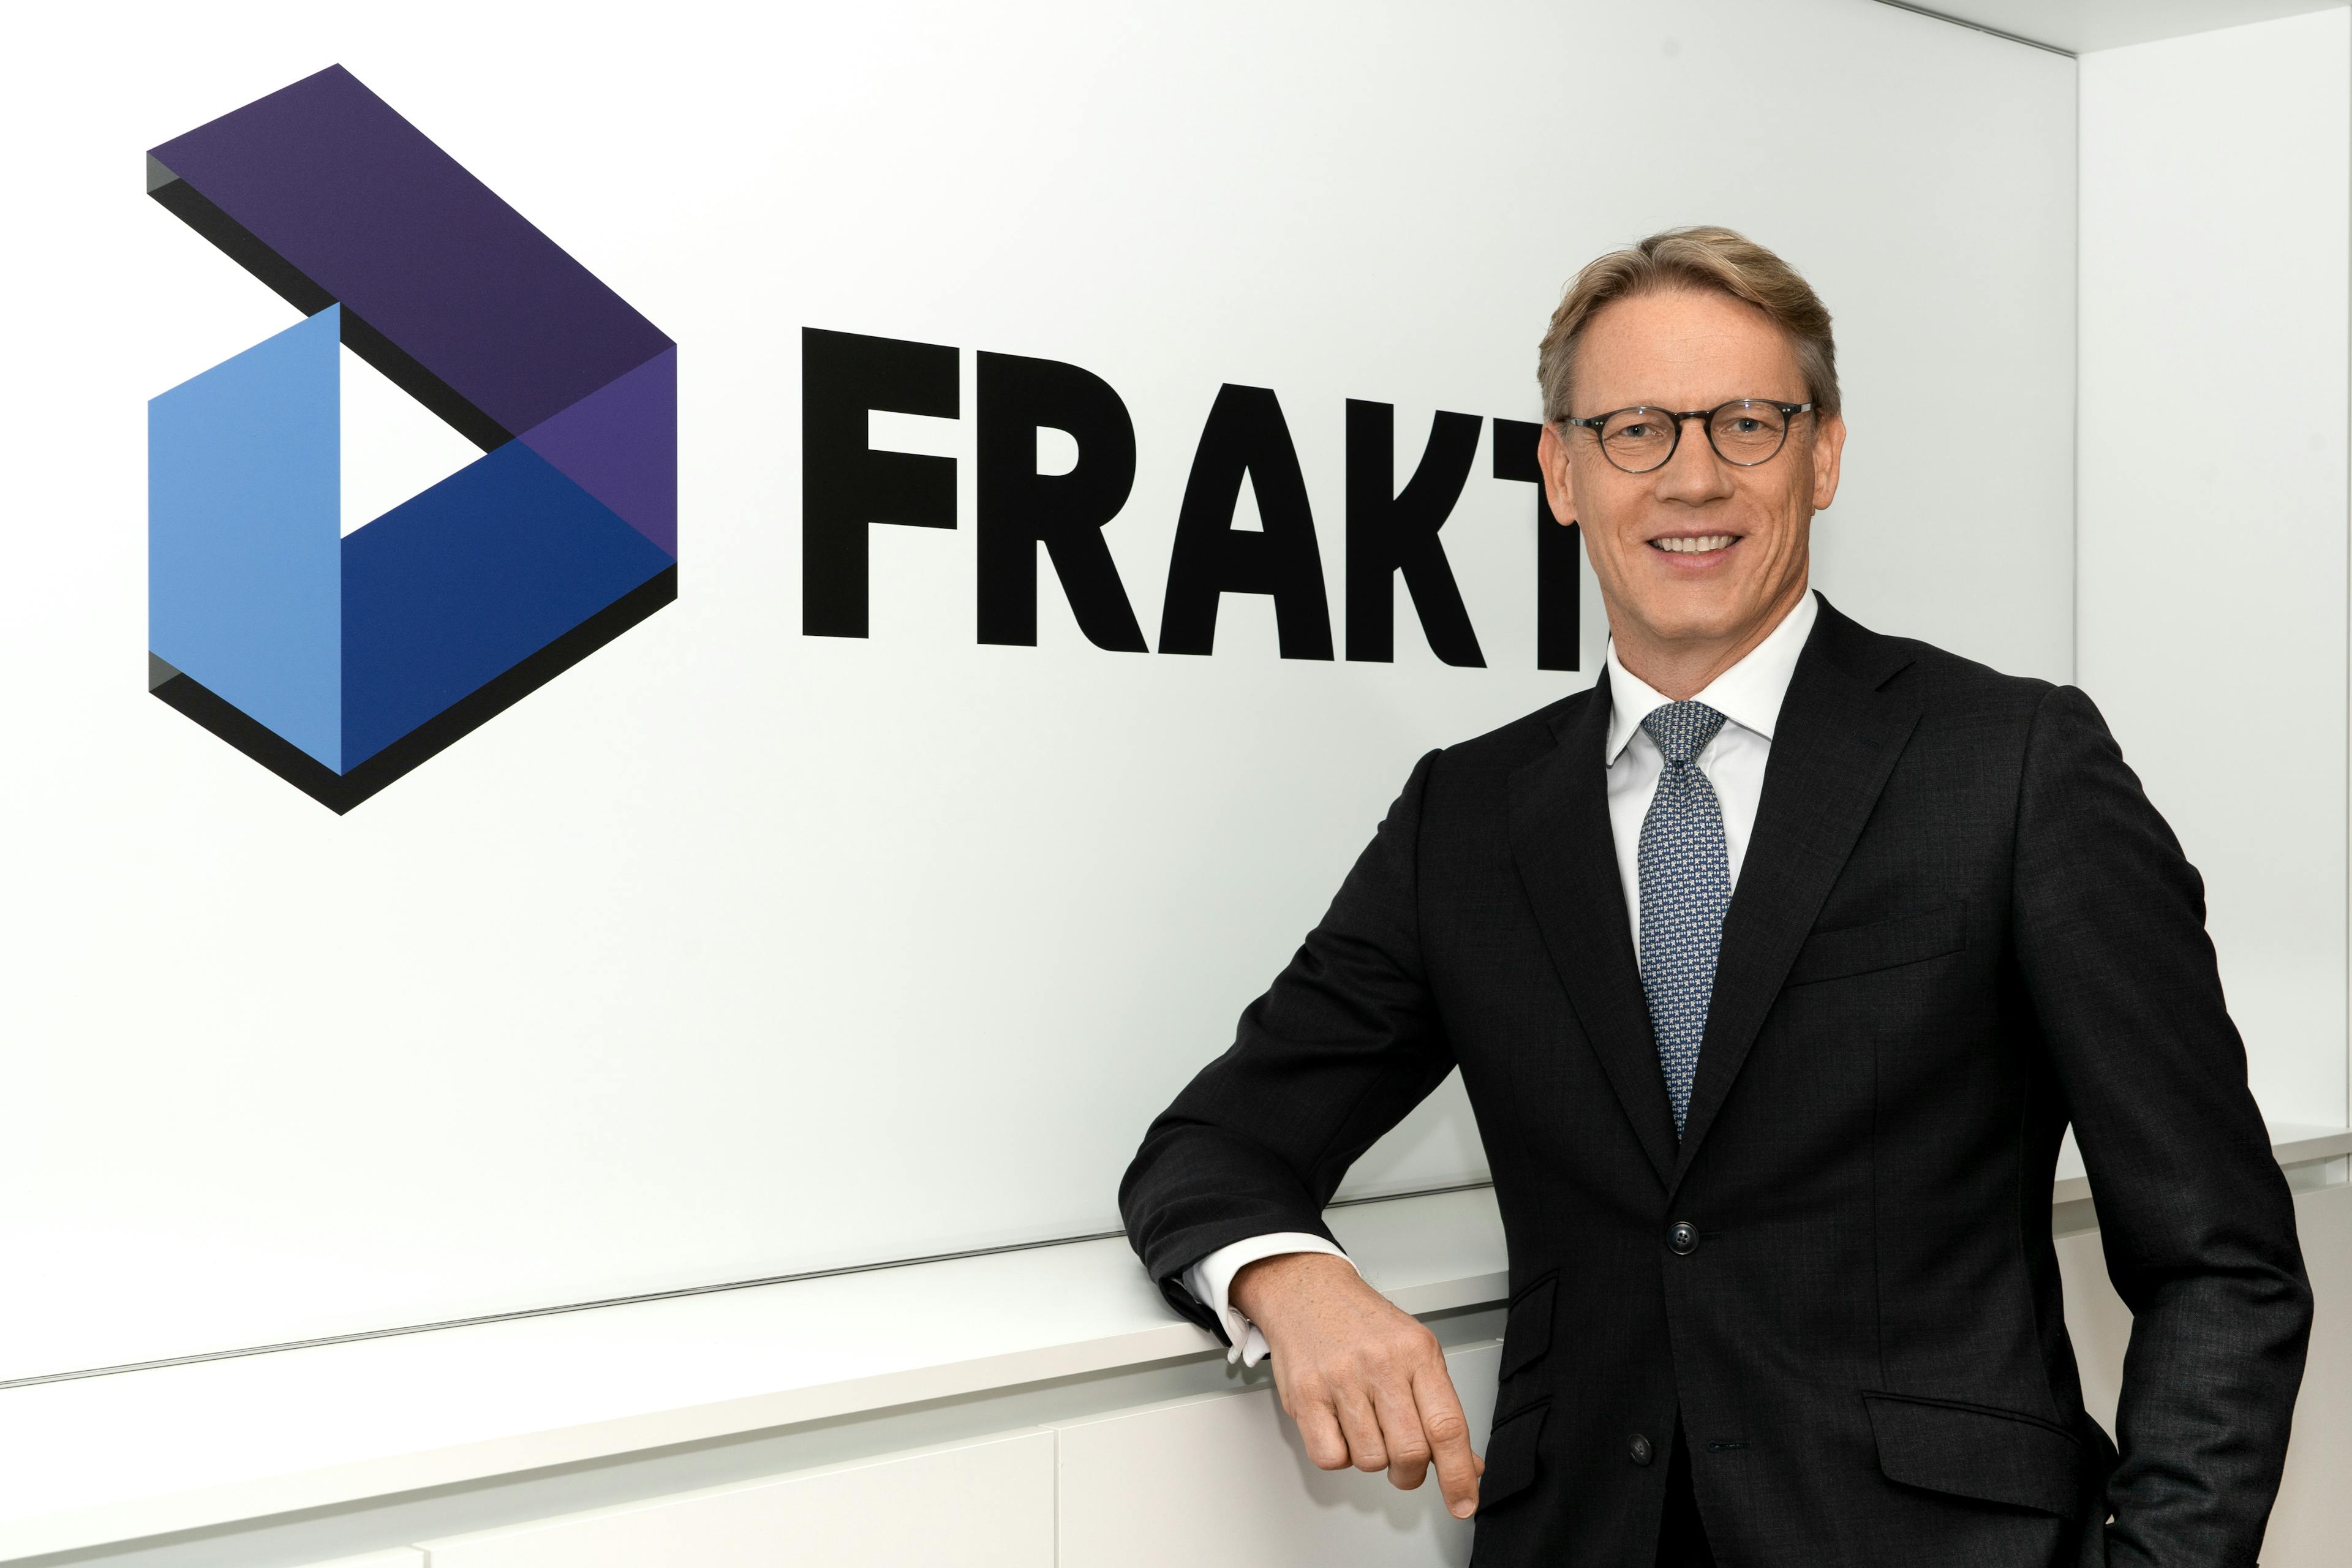 Portrait of Wolfgang Zauner, a partner at Fraktal Development, leaning casually with one hand on a white surface. He's wearing a sleek black suit, a crisp white shirt, and a patterned blue tie. Behind him, the bold 'FRAKTAL' logo with a stylized geometric symbol provides a dynamic and professional backdrop.